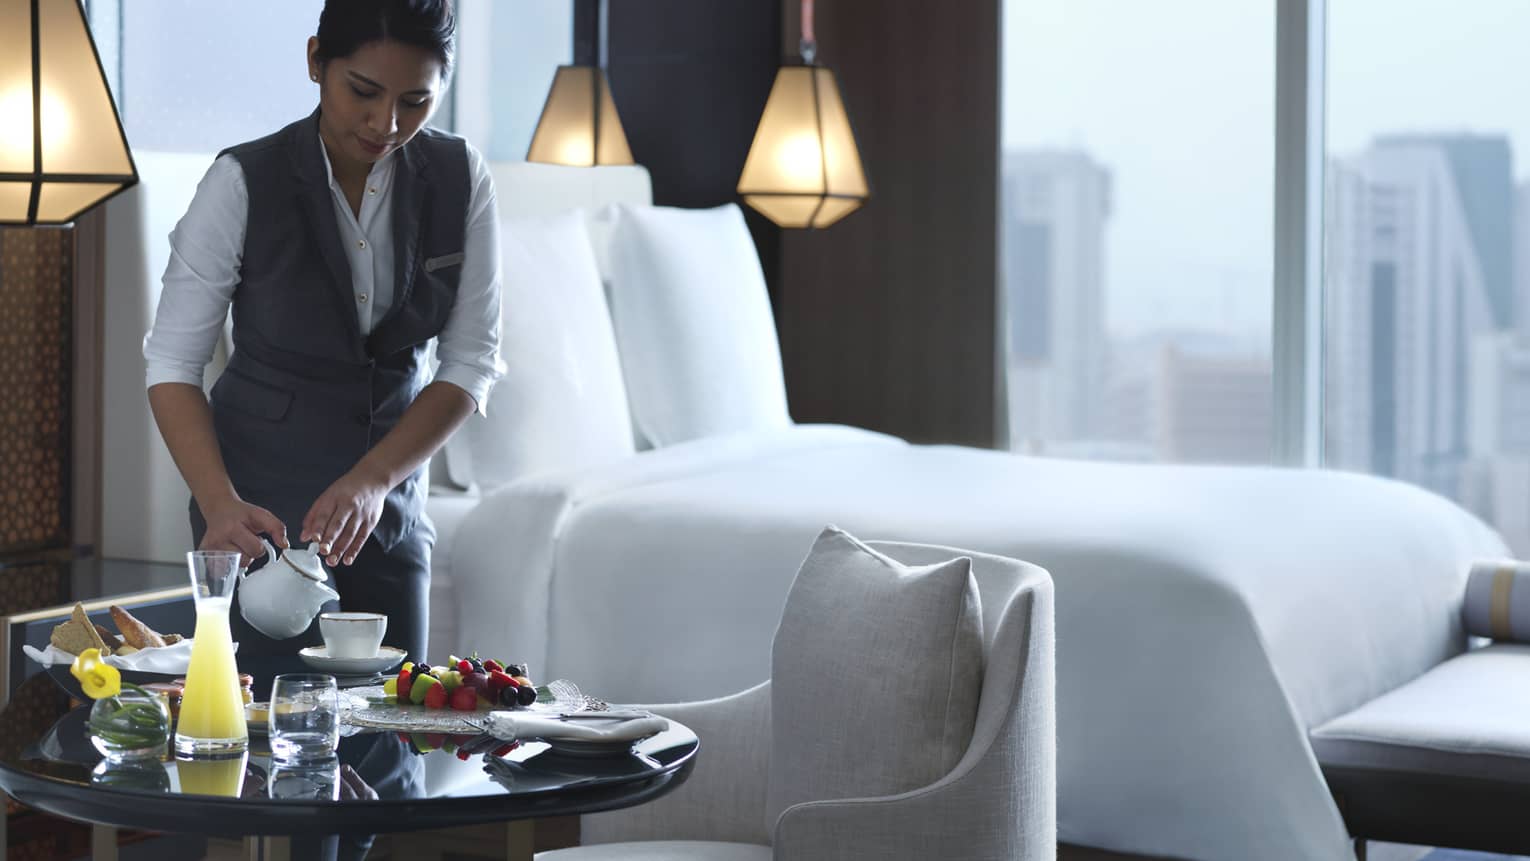 Woman in hotel suite pours tea into a white teacup next to a plate of fruit and bread.